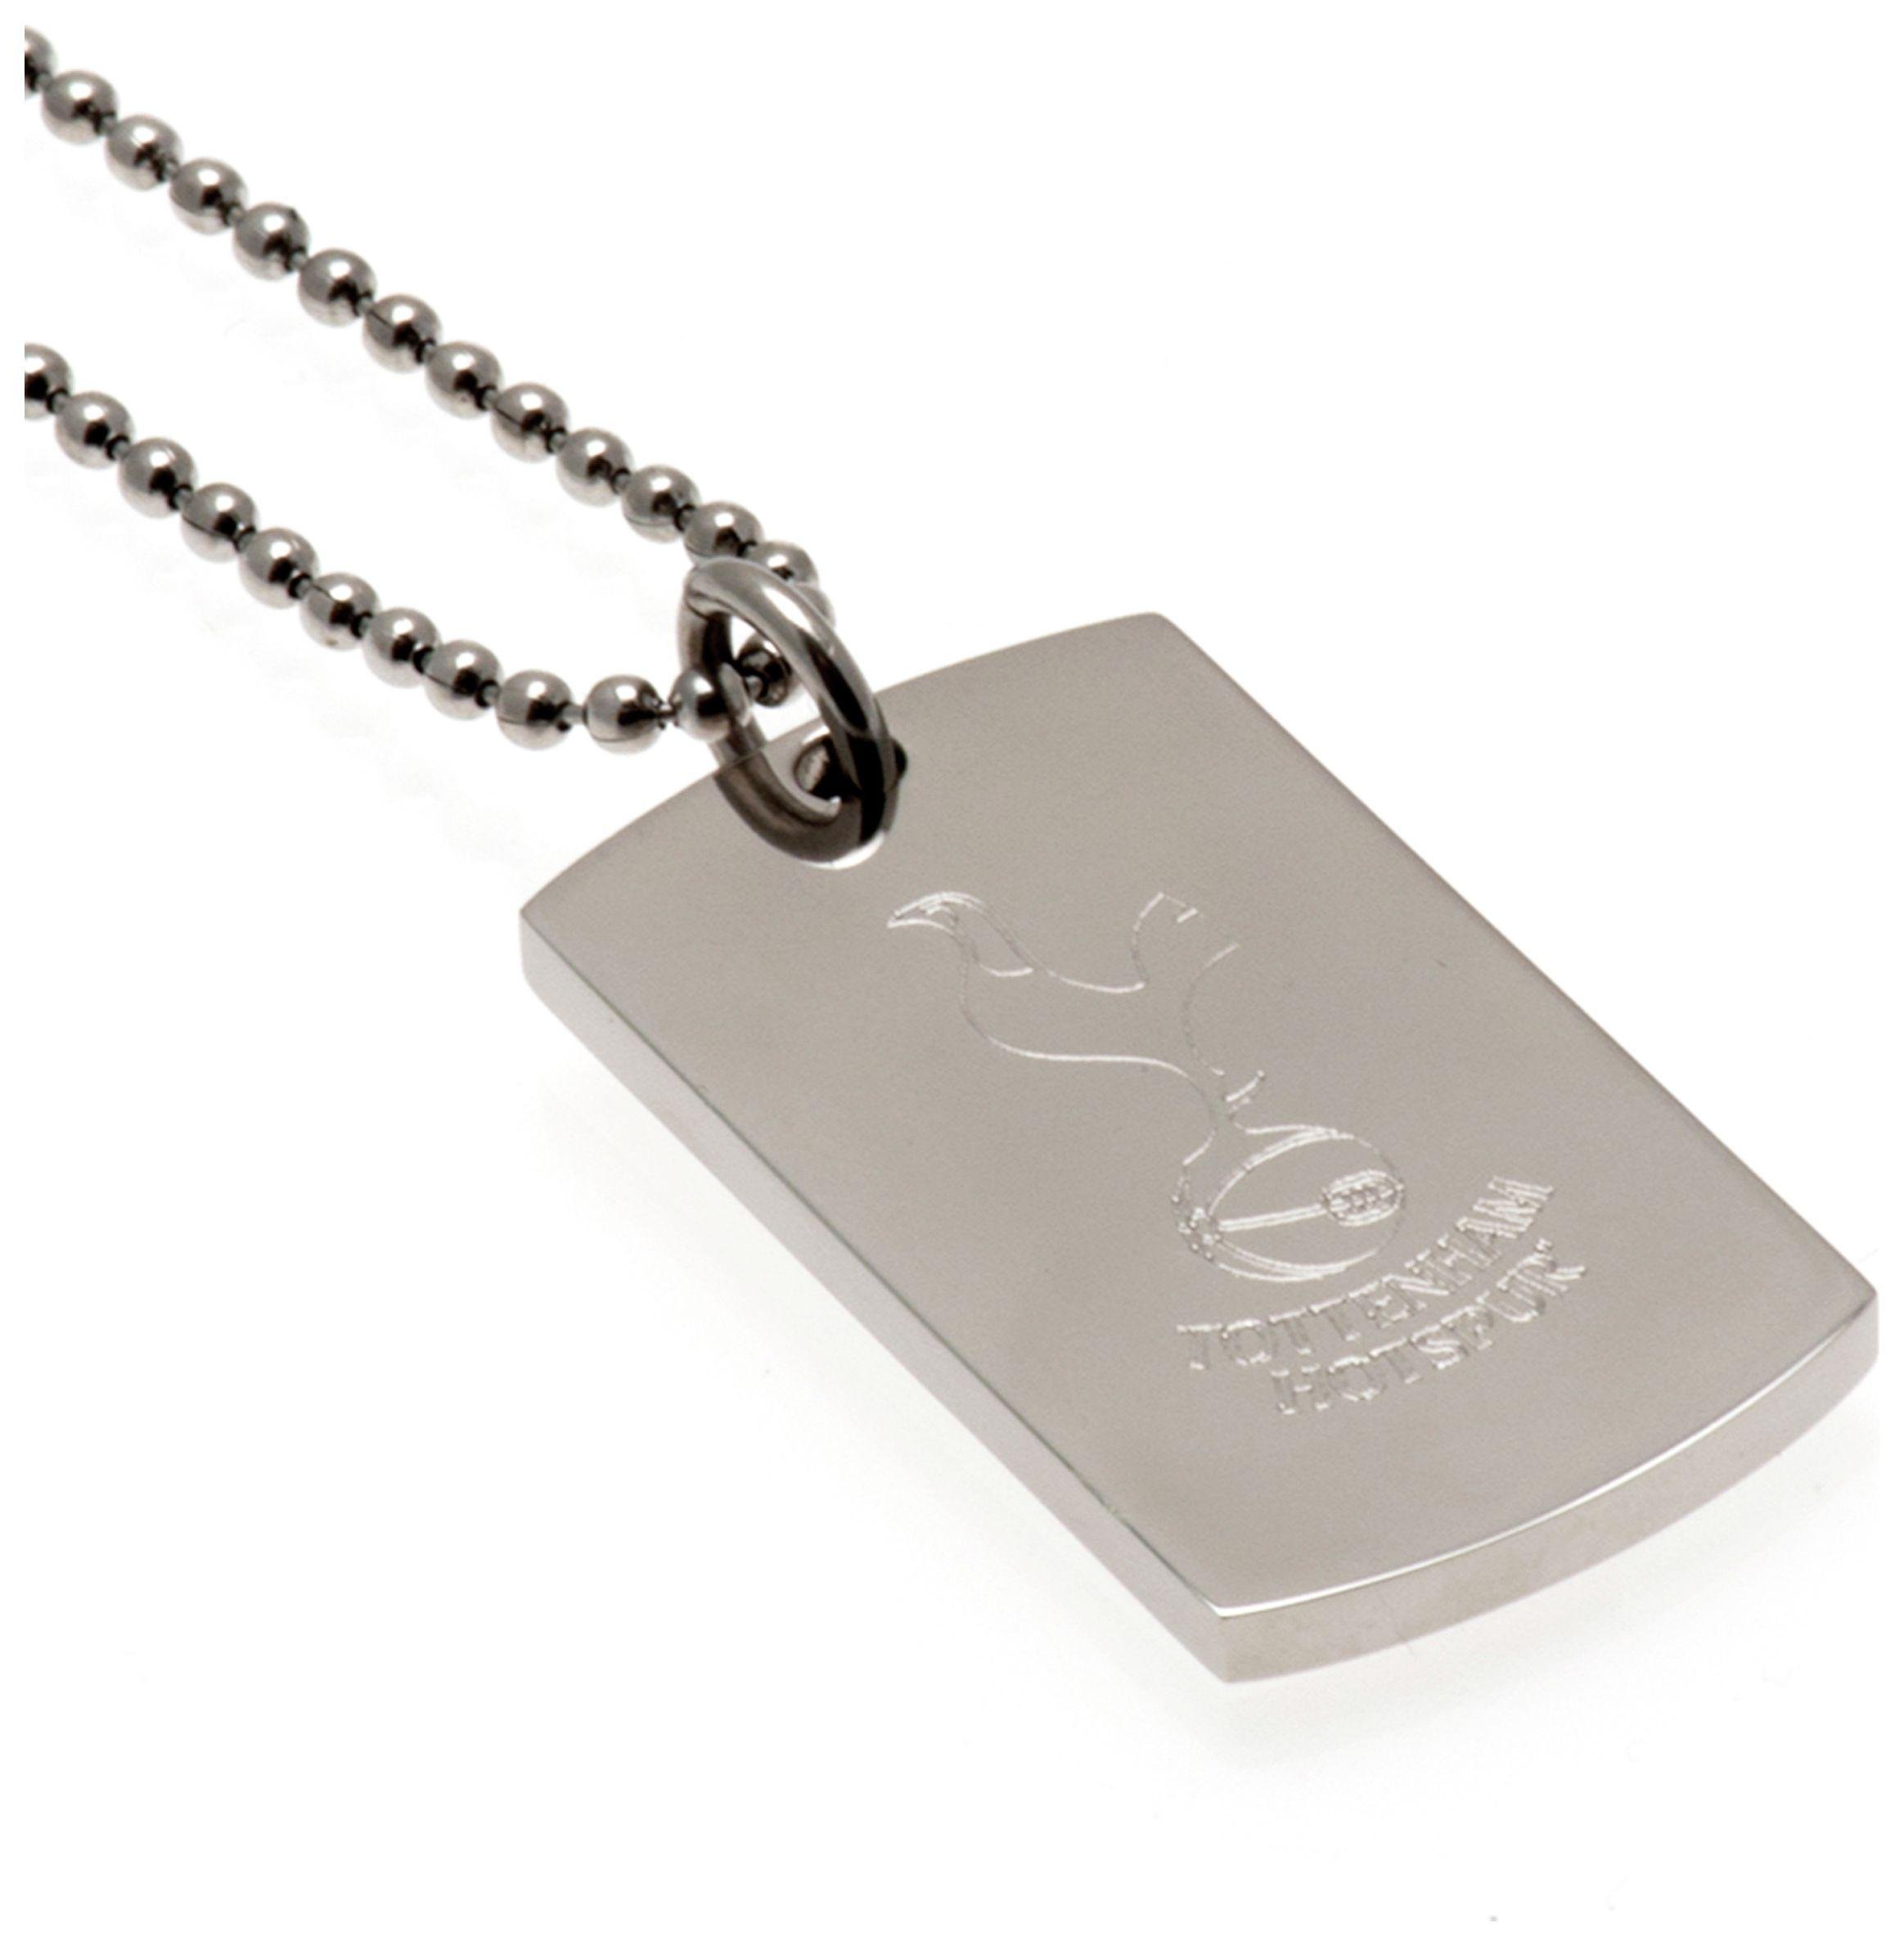 Tottenham Hotspur FC Stainless Steel Dogtag and Chain